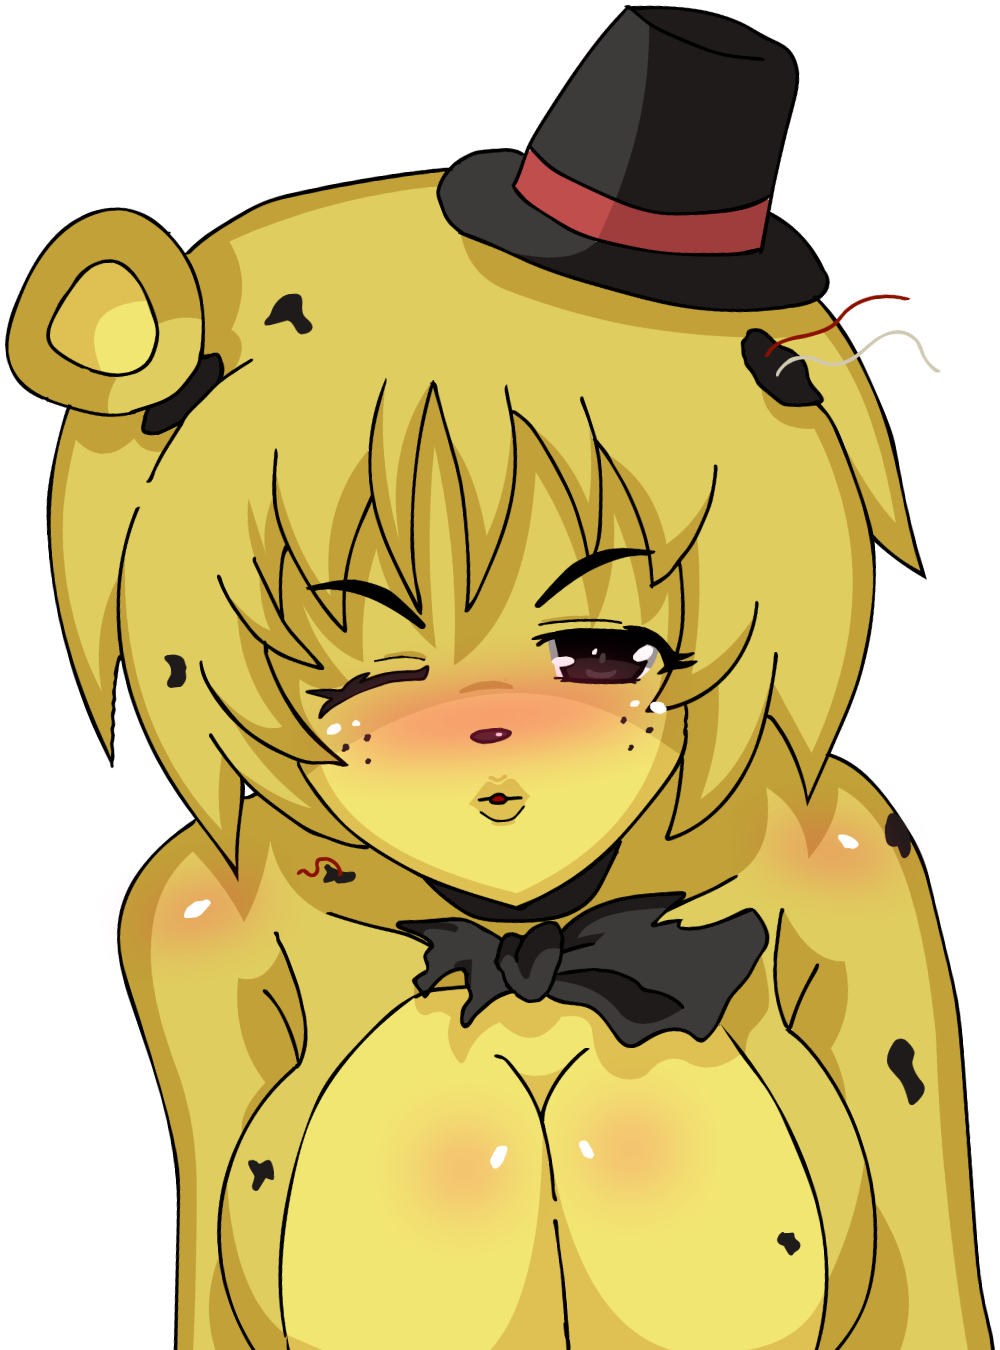 This visual is about goldenfreddy fnia freetoedit #goldenfreddy #fnia #free...